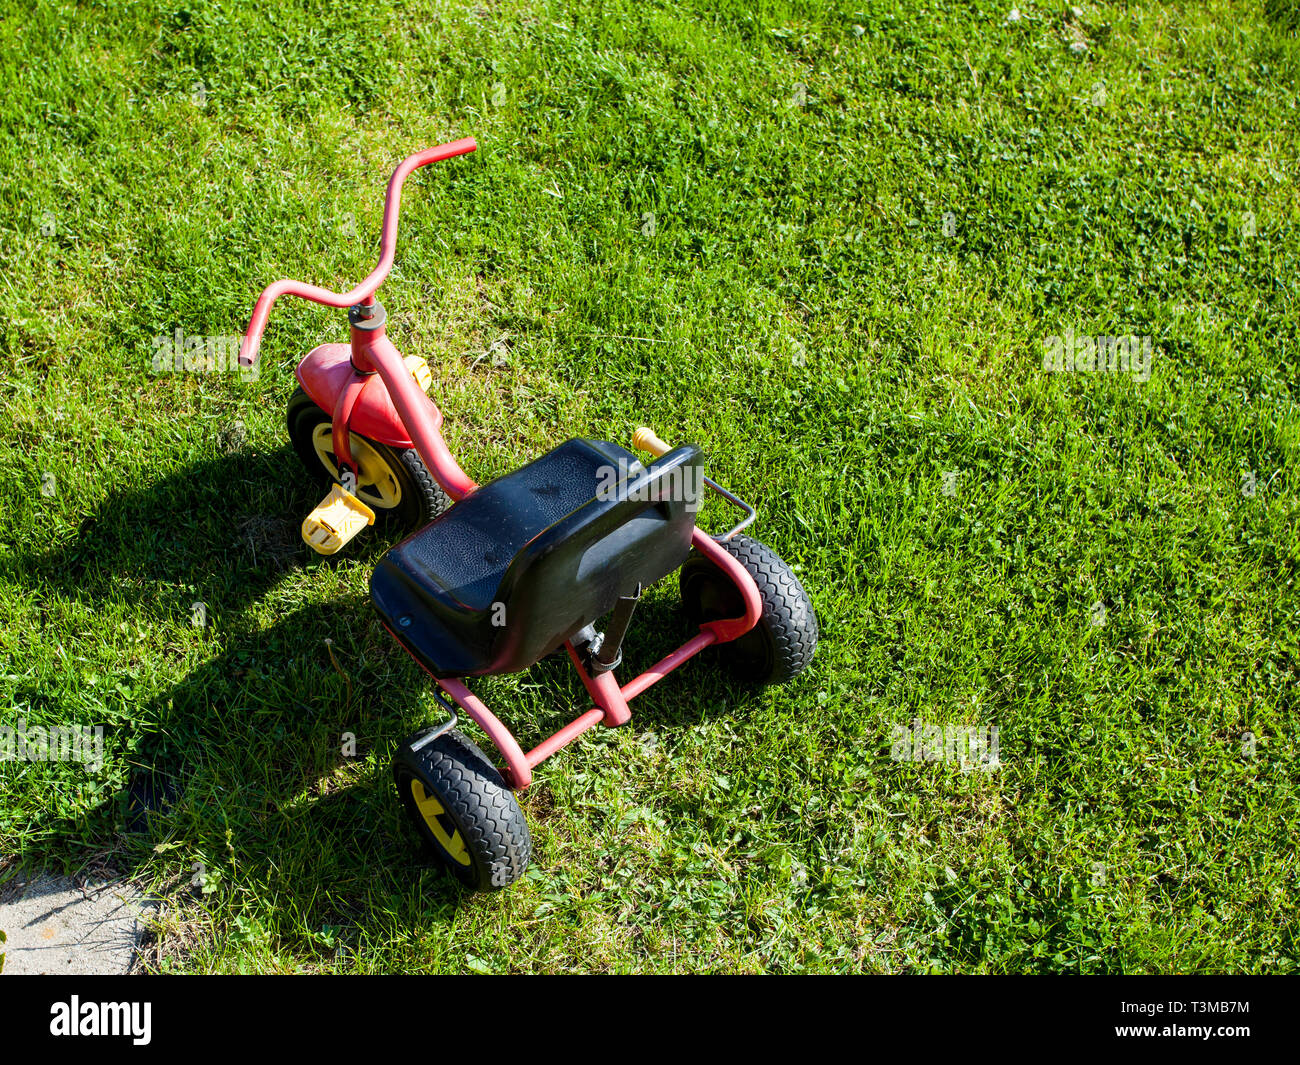 Childhood. Small red tricycle cycle toy on the green grass. Outdoor. Play and learn. Stock Photo